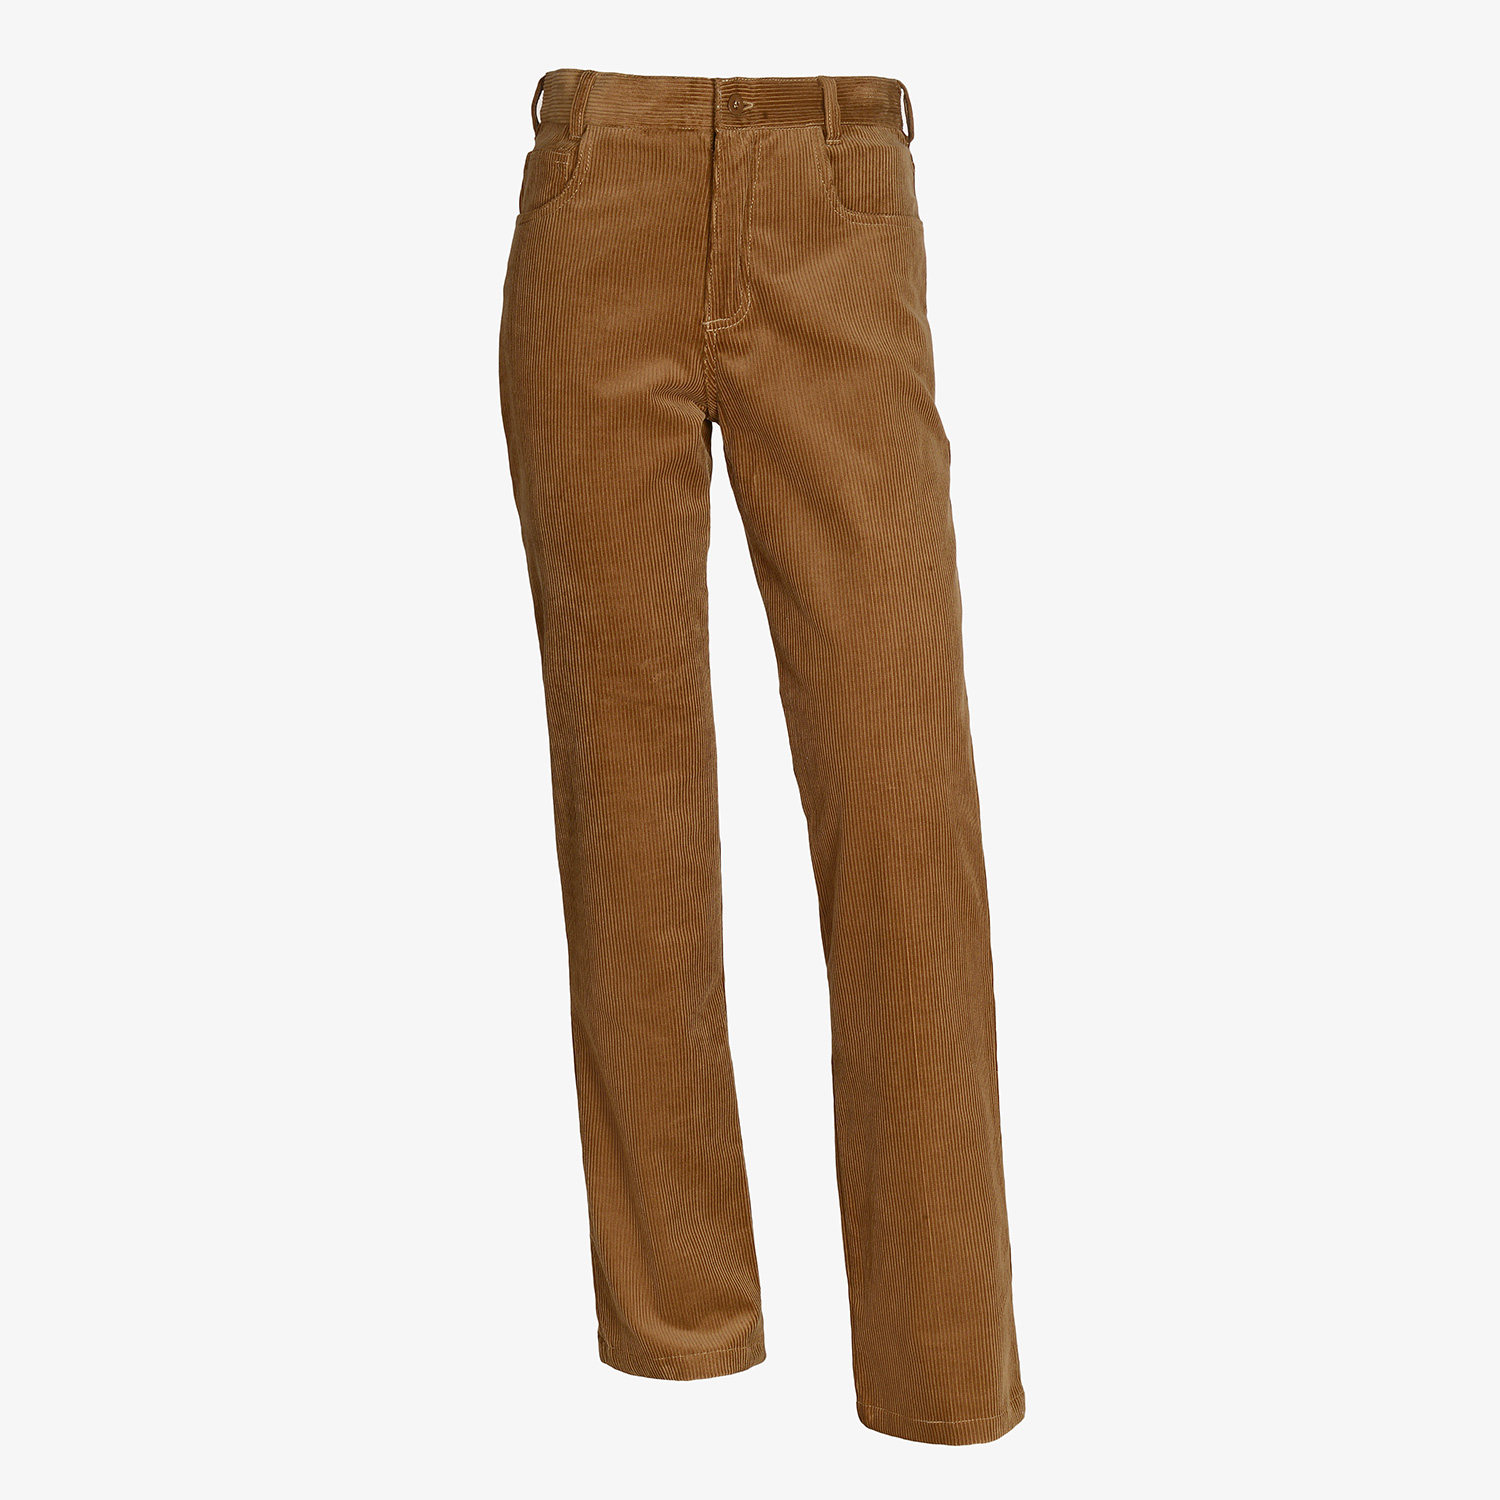 ORION 5-pocket trousers organic corduroy with elasthan